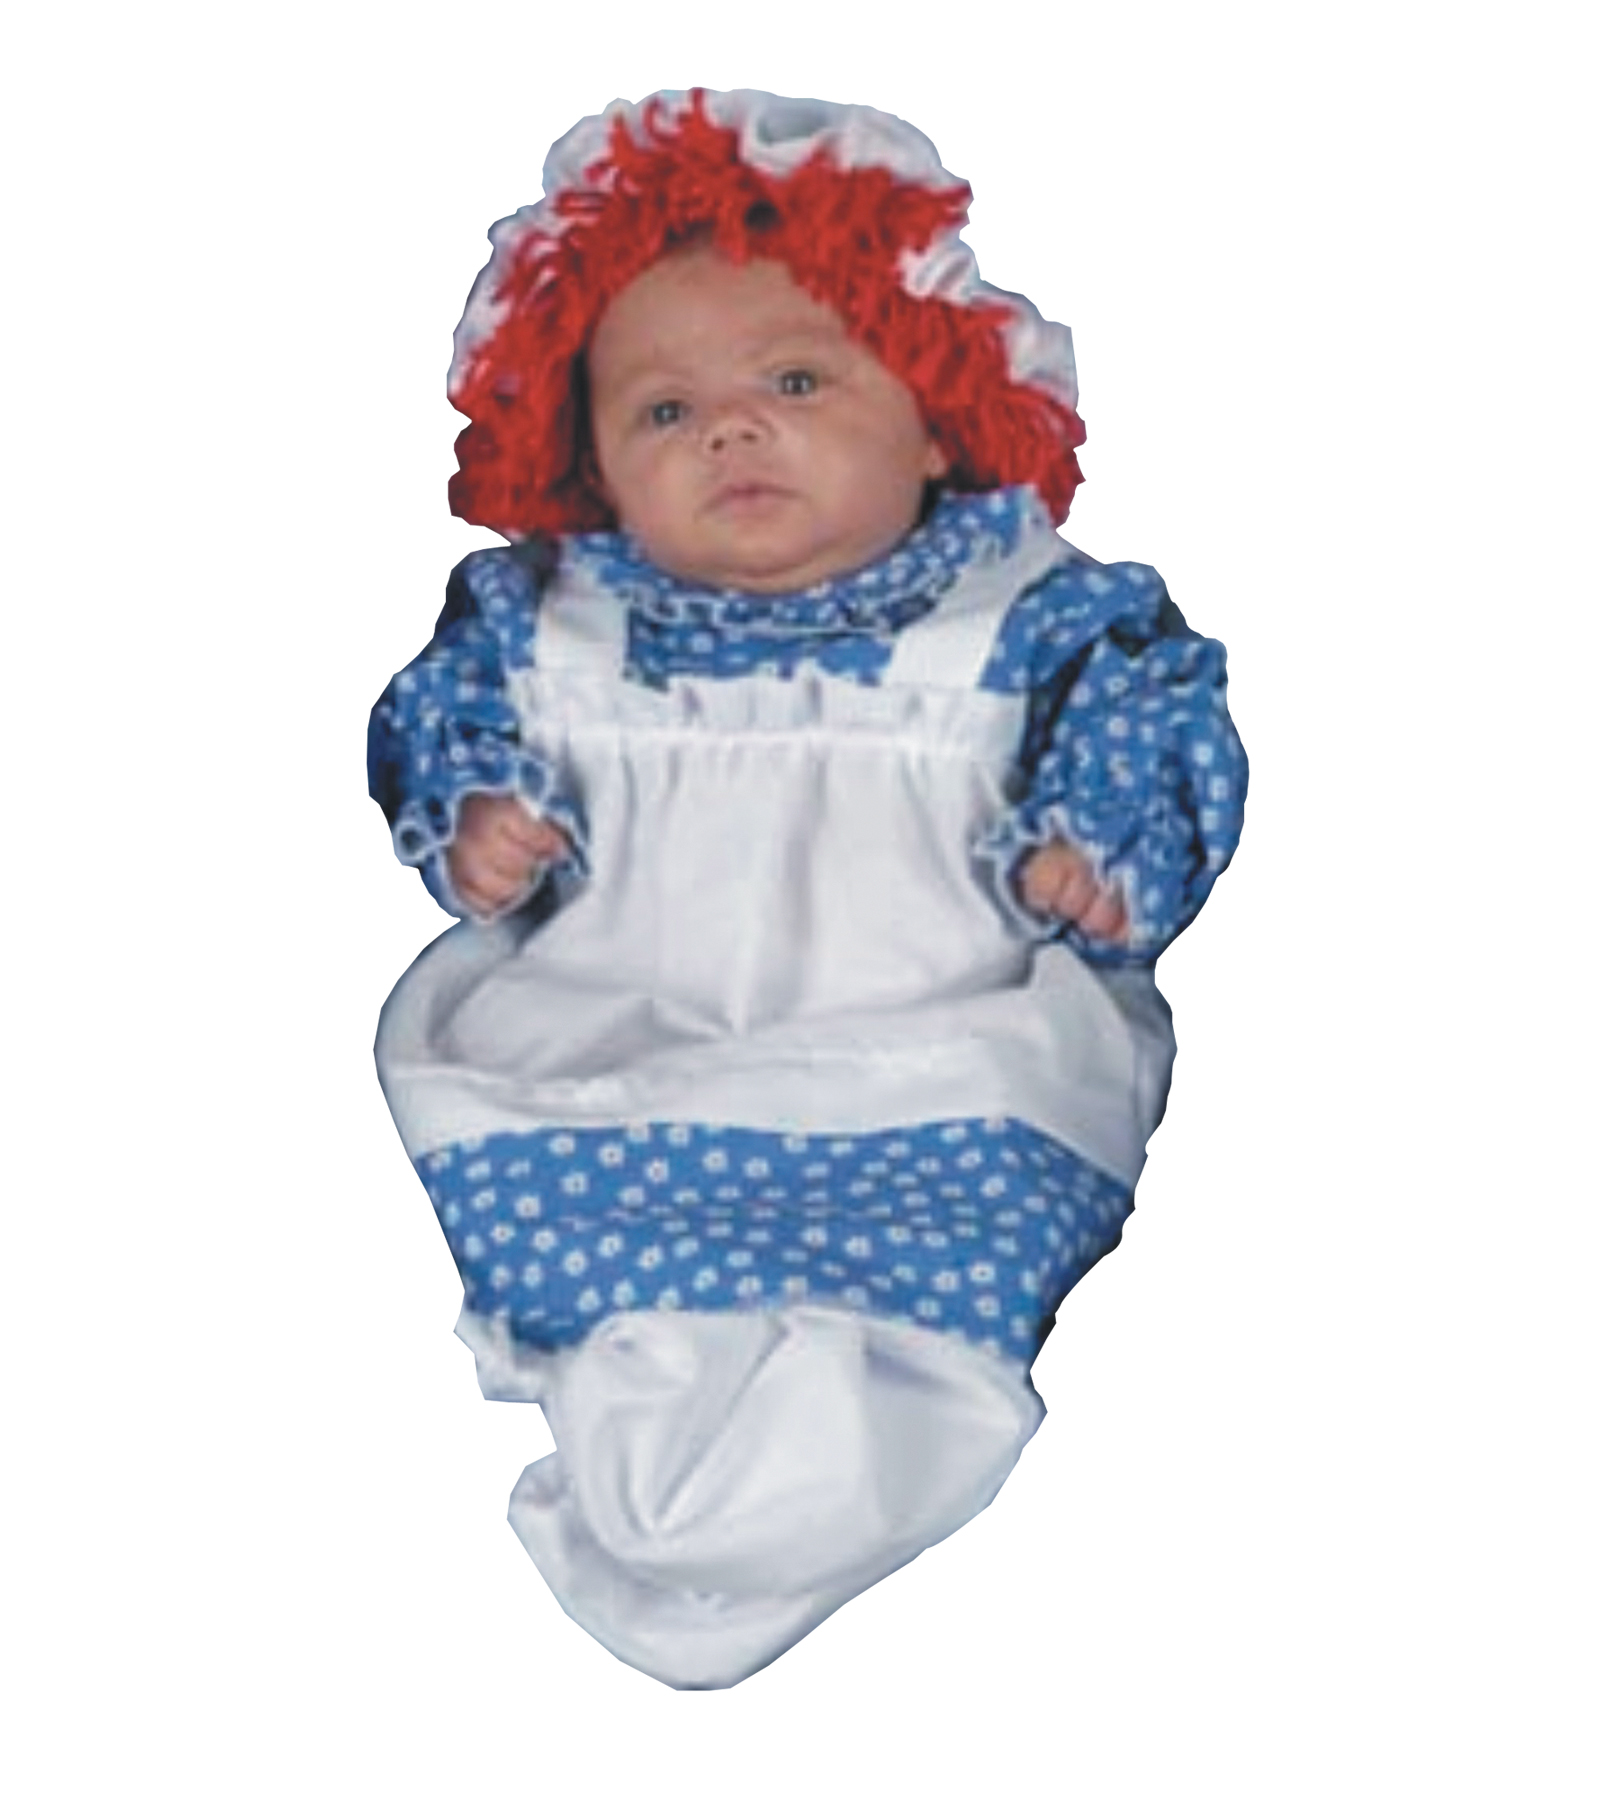 Infant Raggedy Ann Bunting Halloween Costume Size: 0-6 months